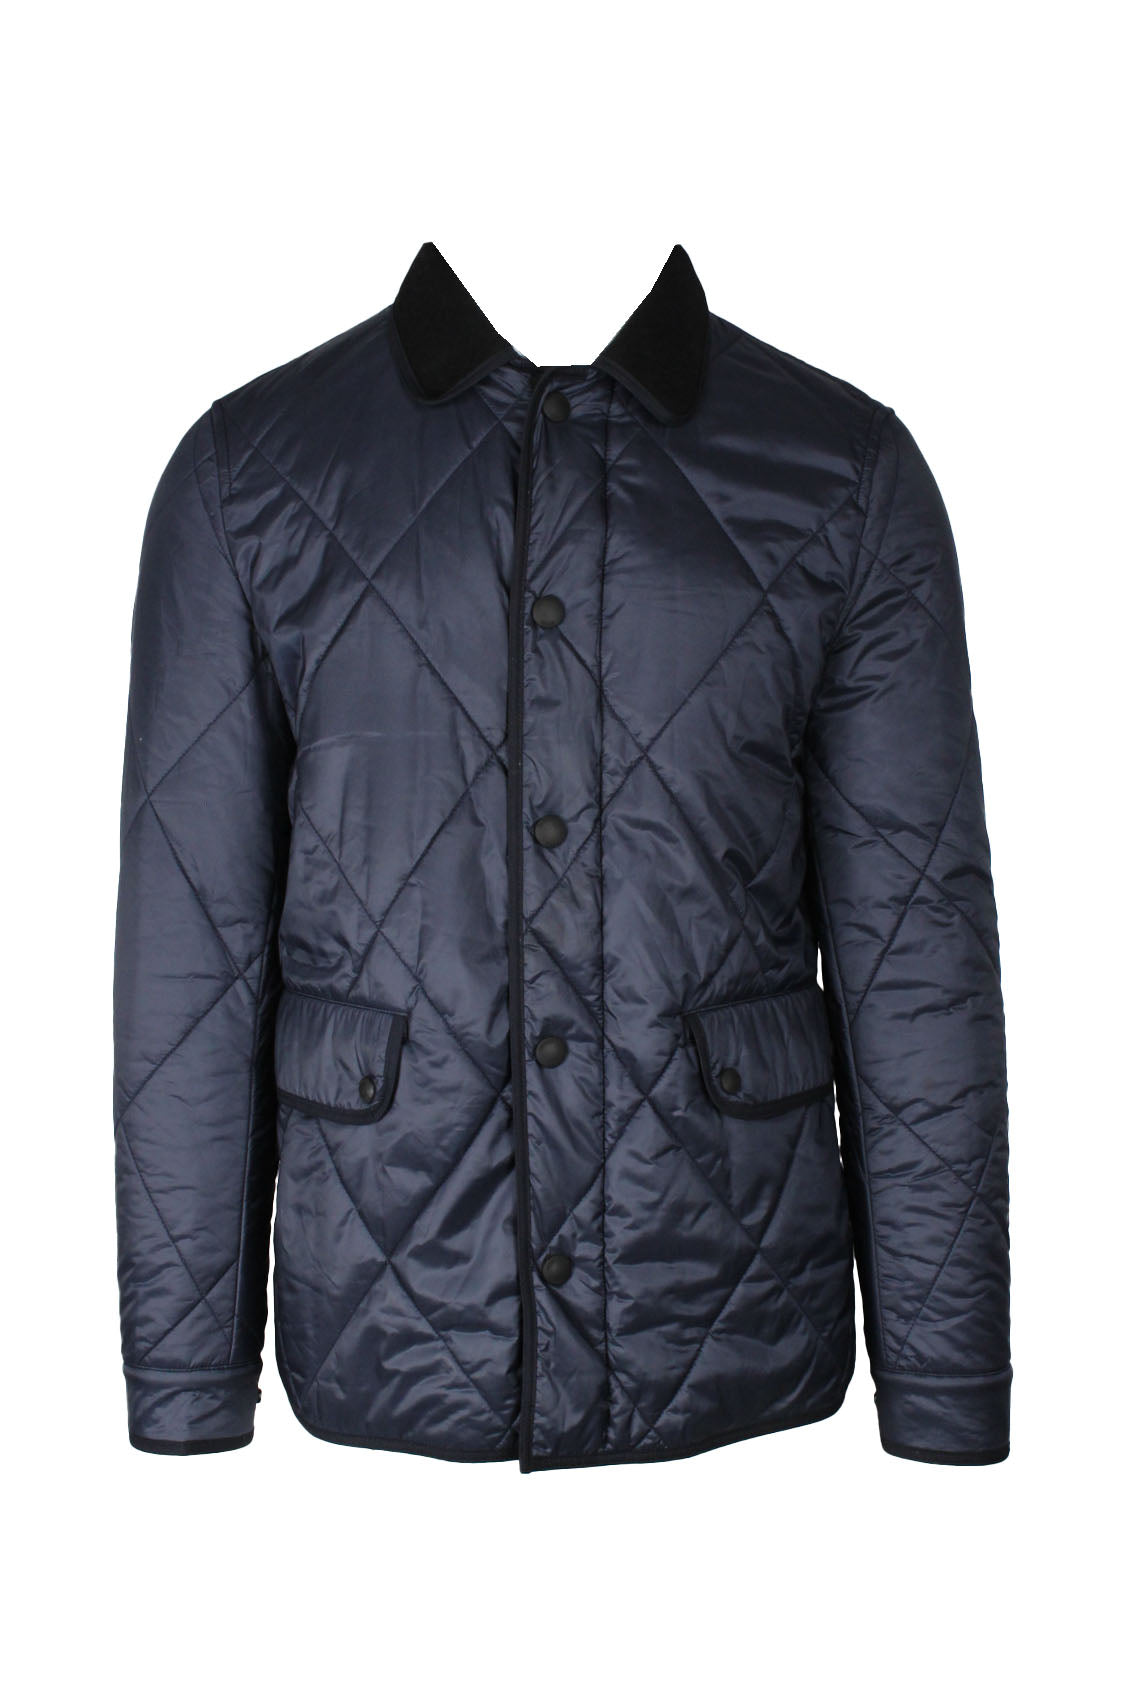 front view of burberry brit navy zip/snap button up quilted jacket. features leather ‘burberry brit’ logo tag at back below fleece collar, front double snap flap pockets, inner snap chest pocket, and snaps at sides of hem/cuffs.